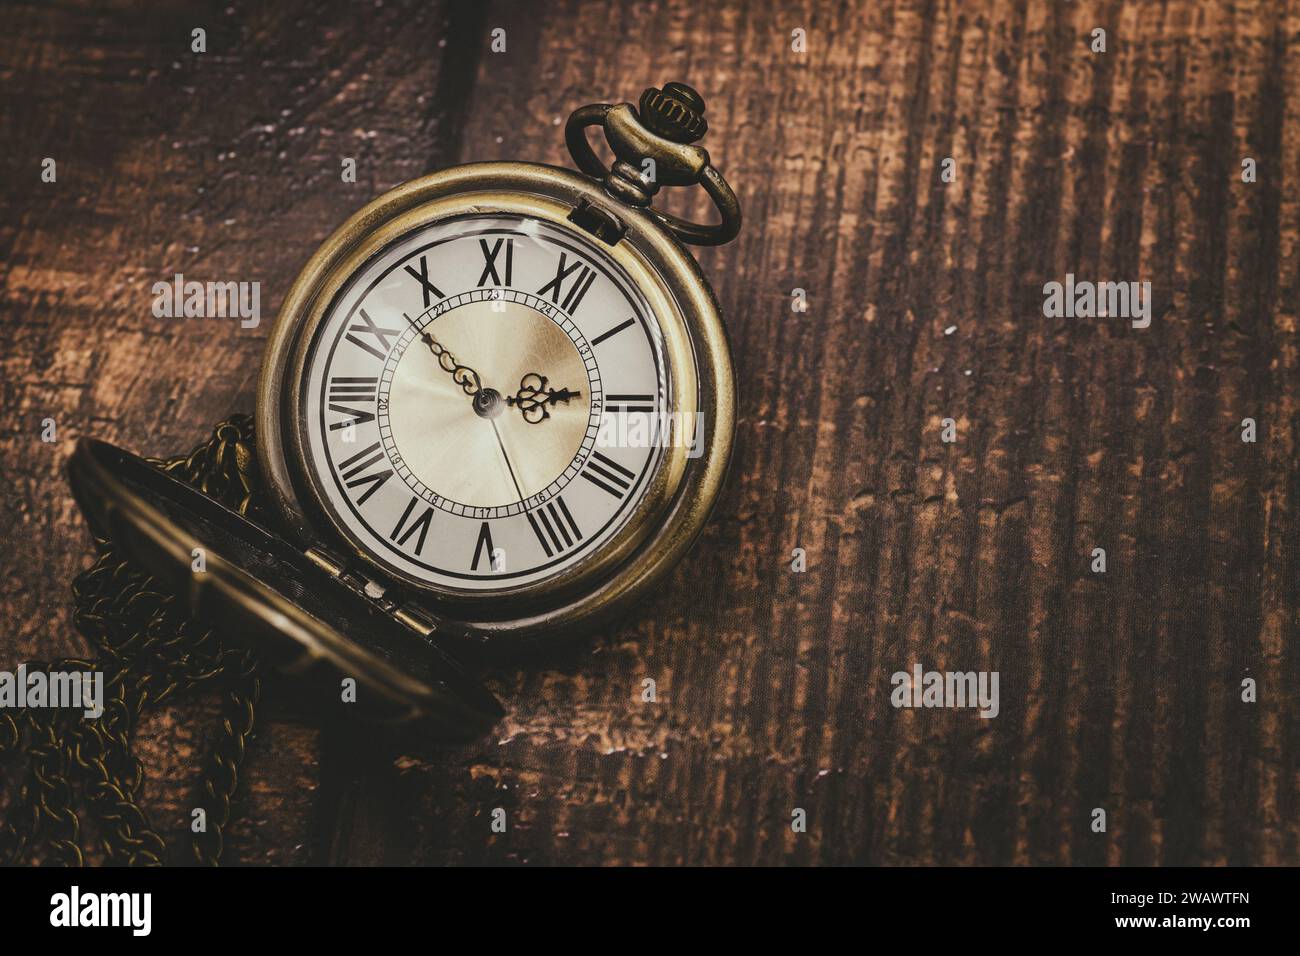 old pocket watch classic clock time vintage retro style on wood background with space for text Stock Photo